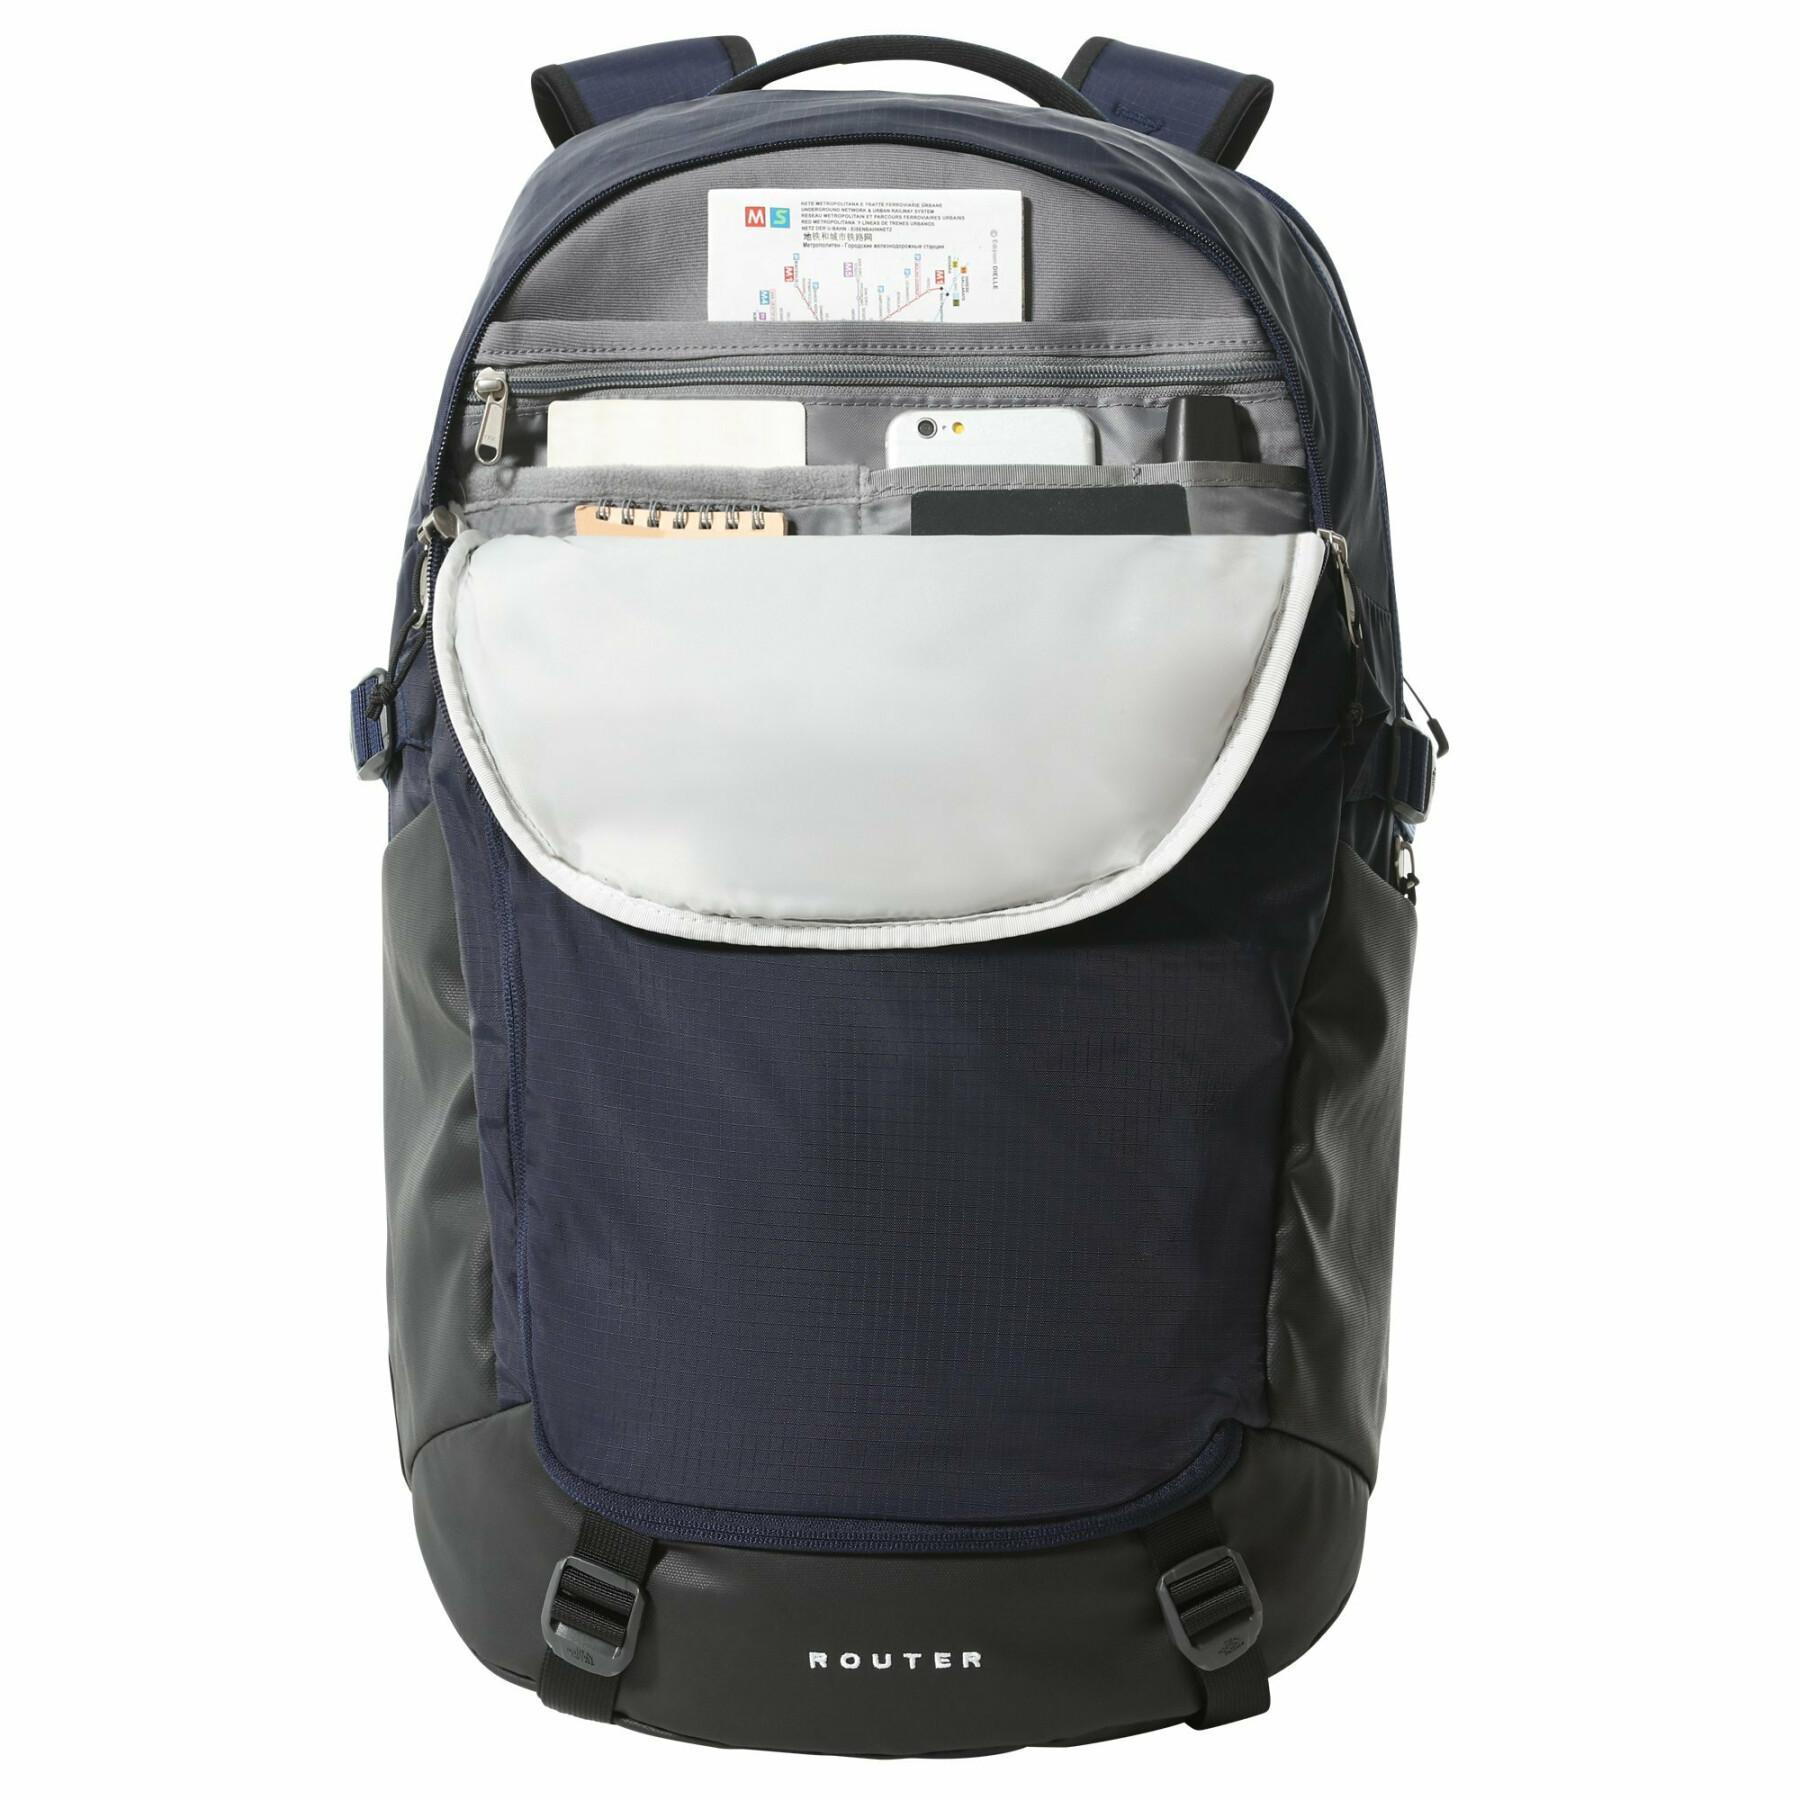 Ryggsäck The North Face Router